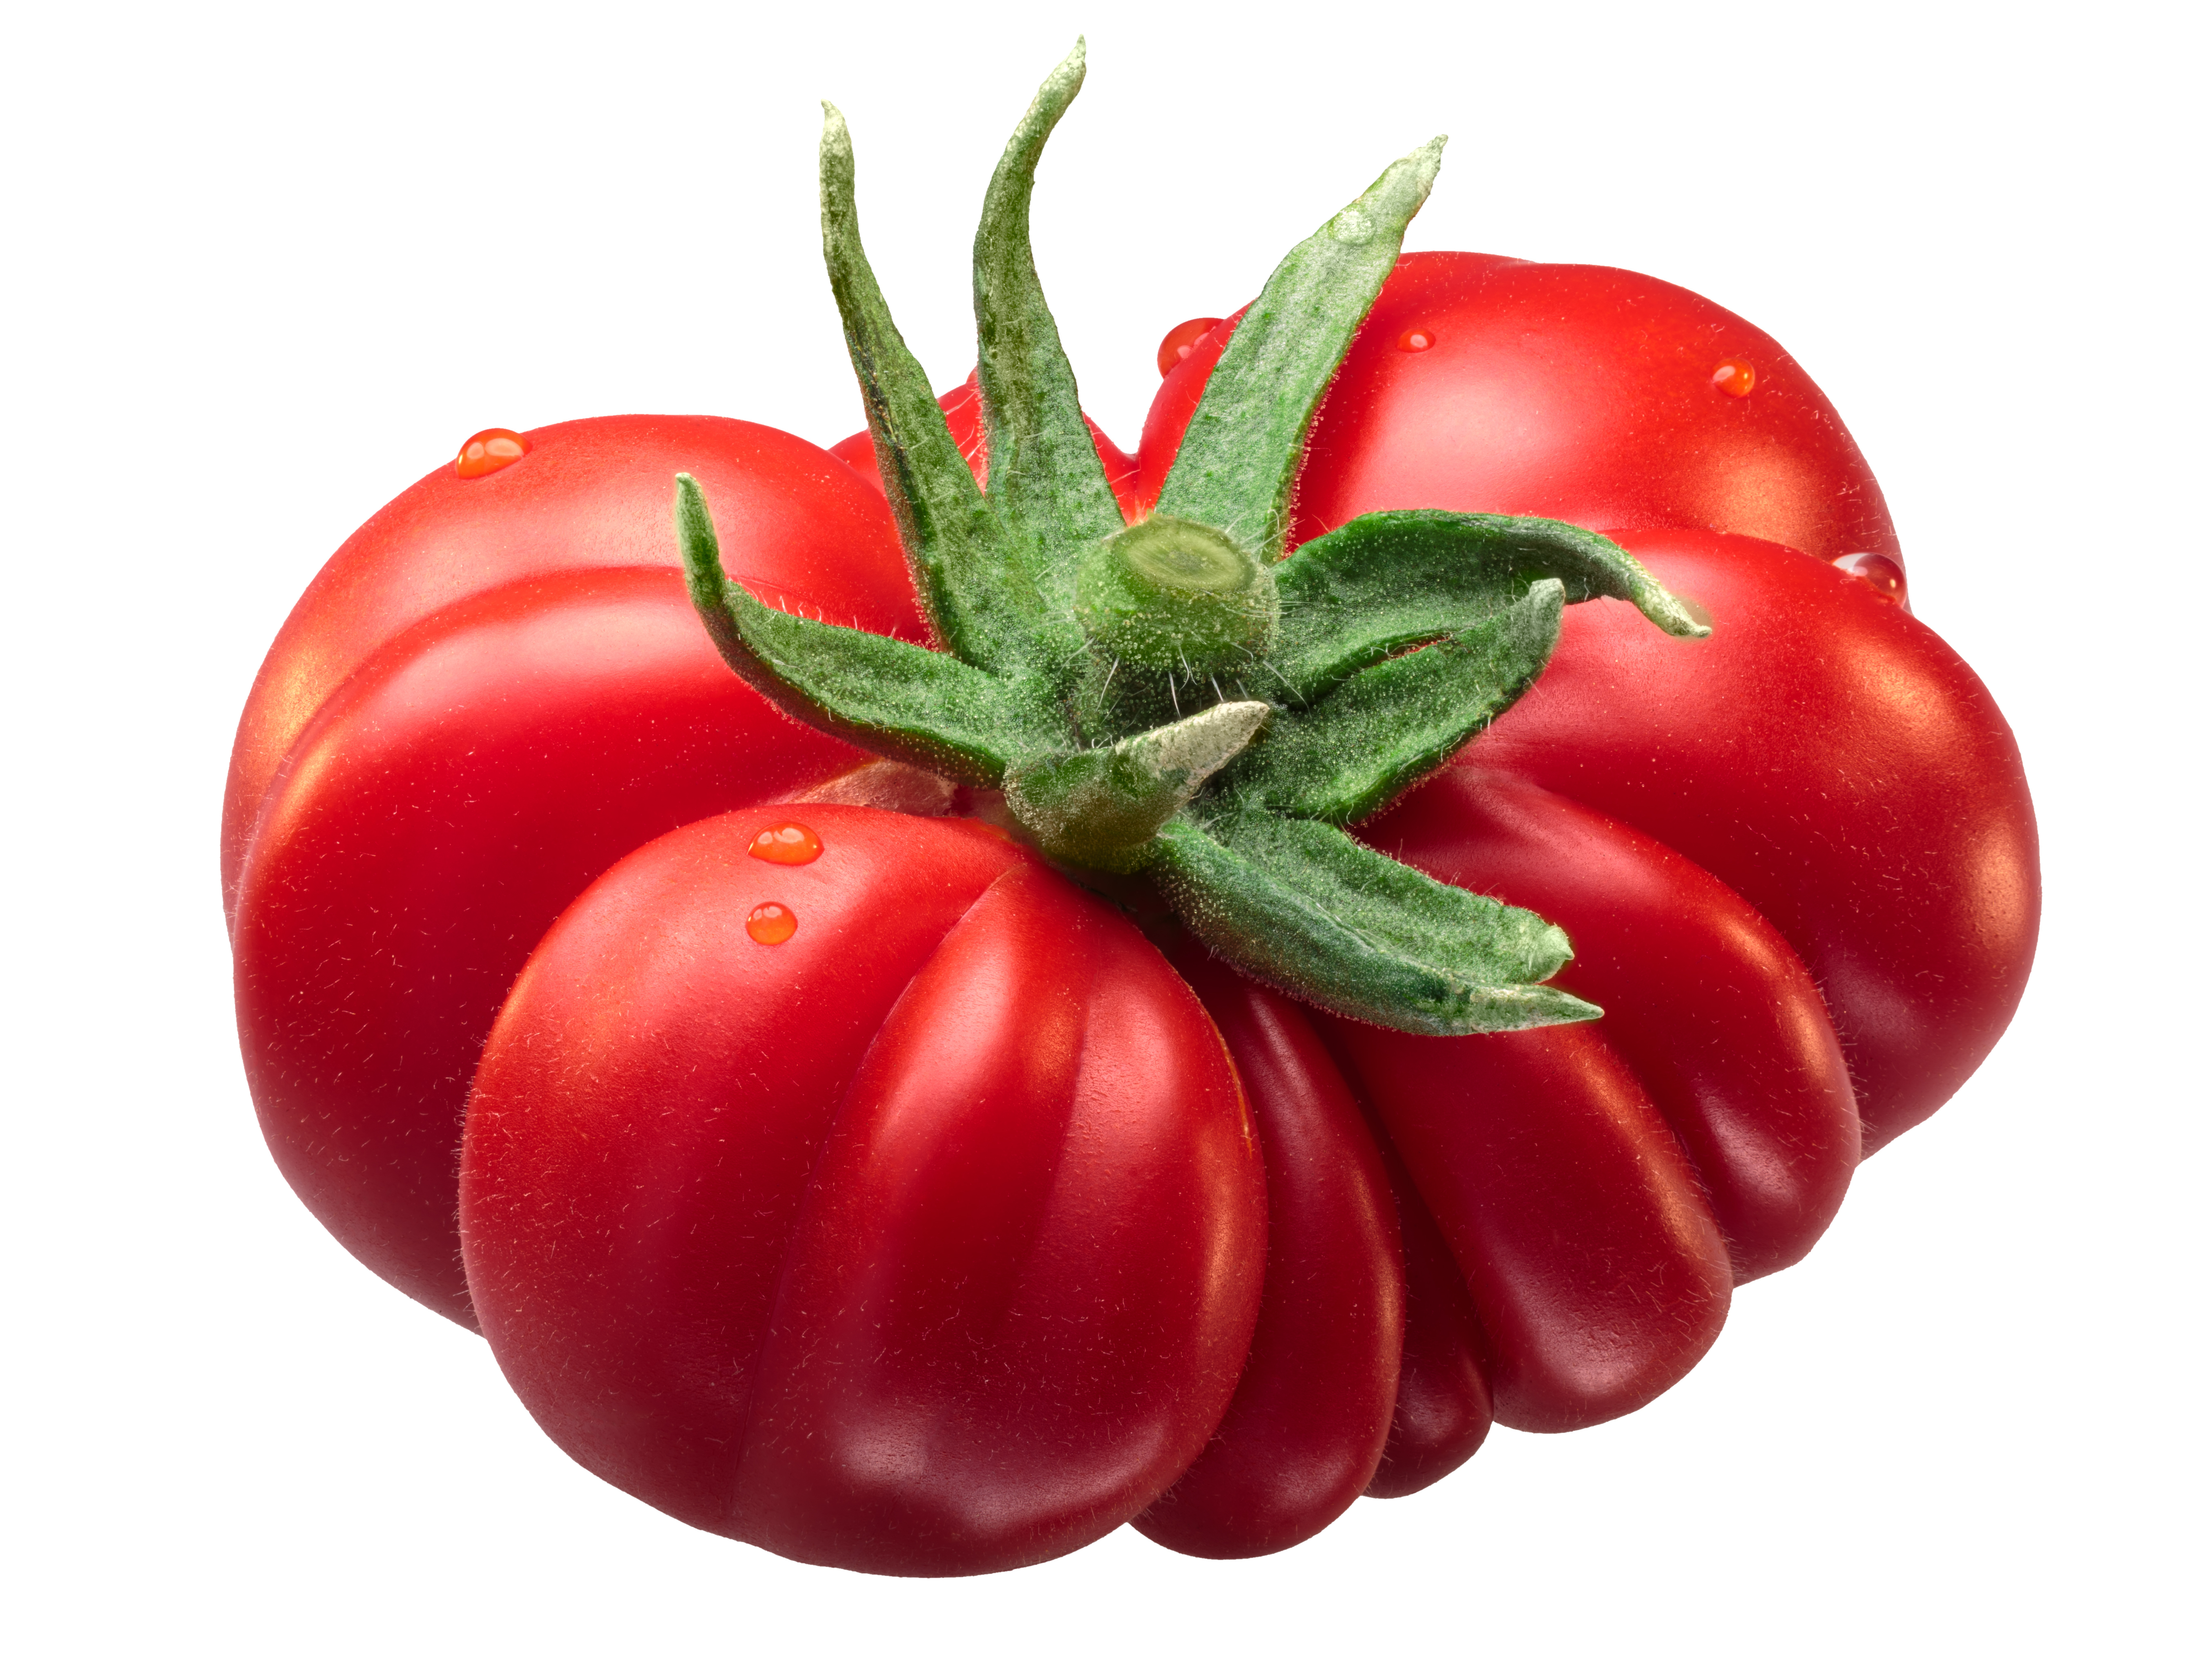 Picture of a tomato. Even a tomato can inspire mindful creative writing.